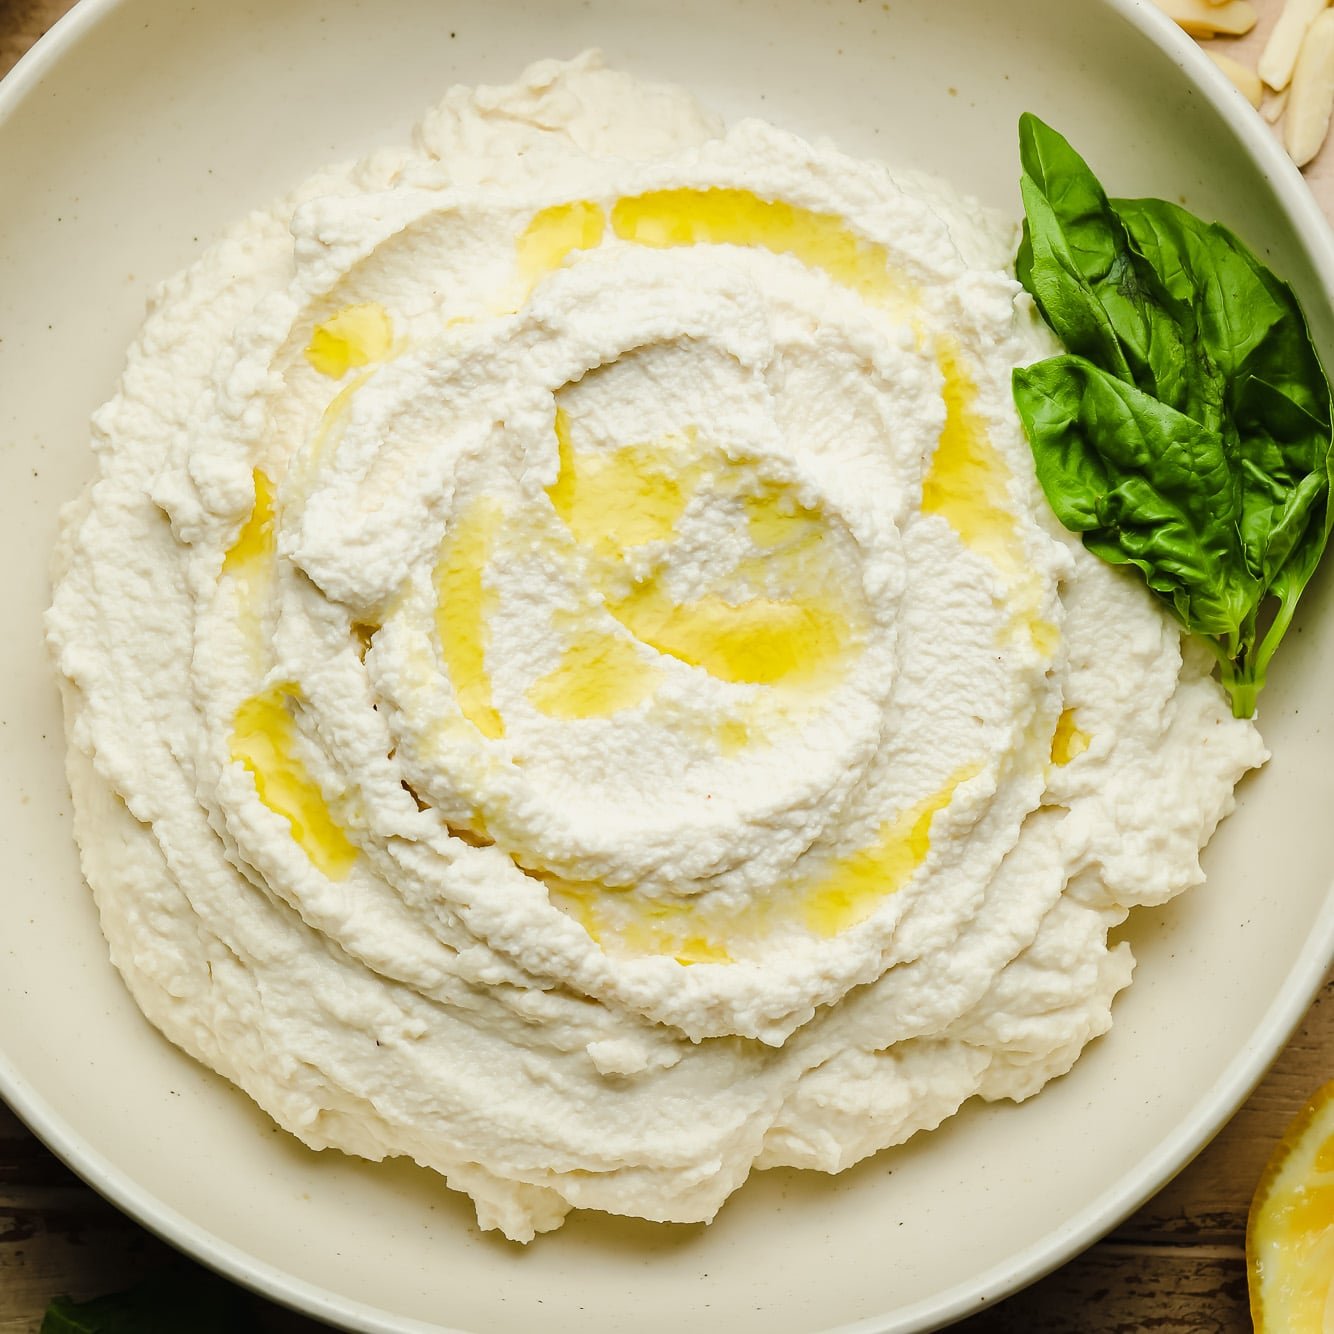 How To Make Ricotta Cheese with only 4 Ingredients